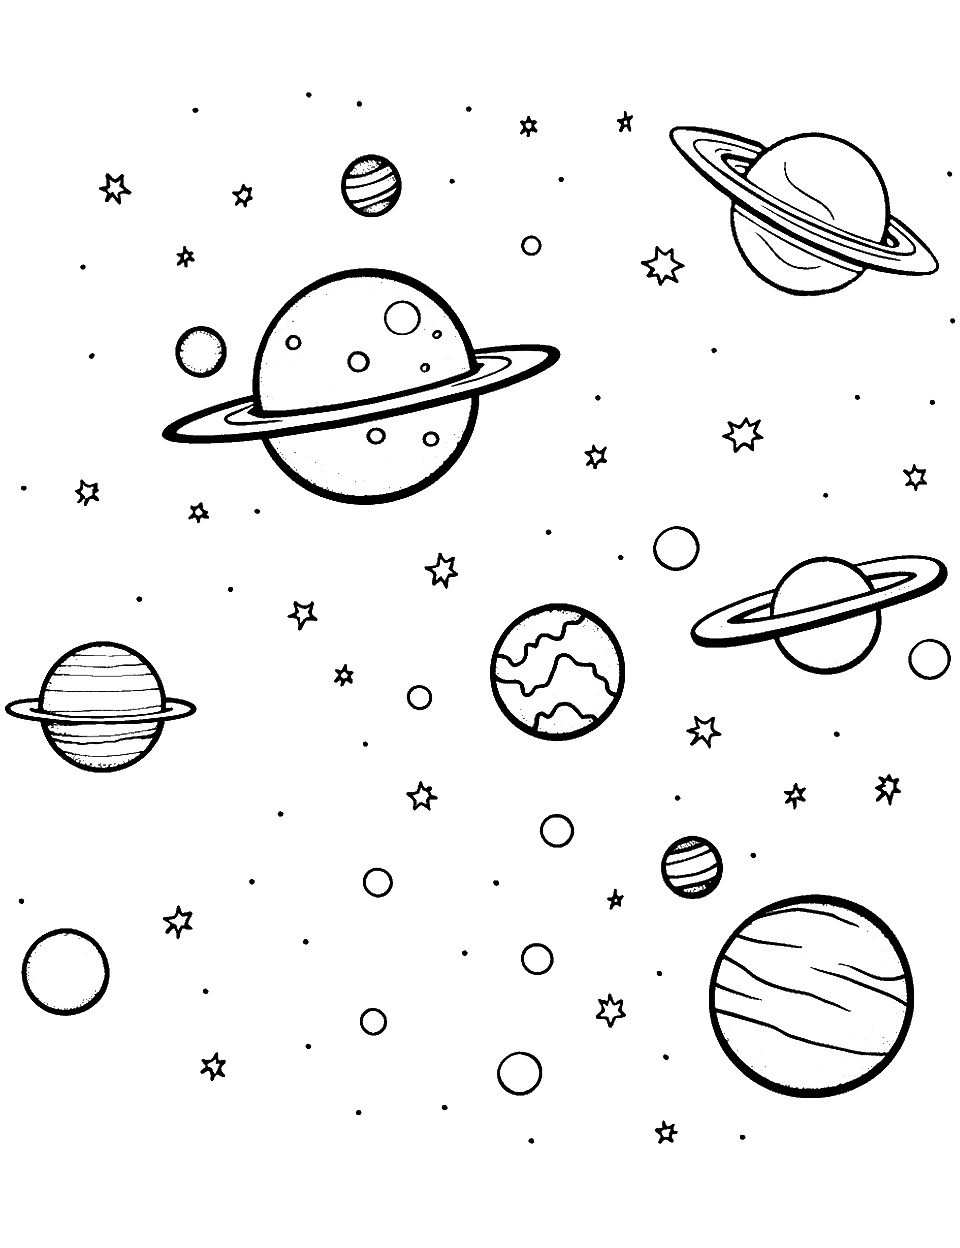 Cool Asteroid Belt Solar System Coloring Page - A scene of the asteroid belt with various-sized asteroids.